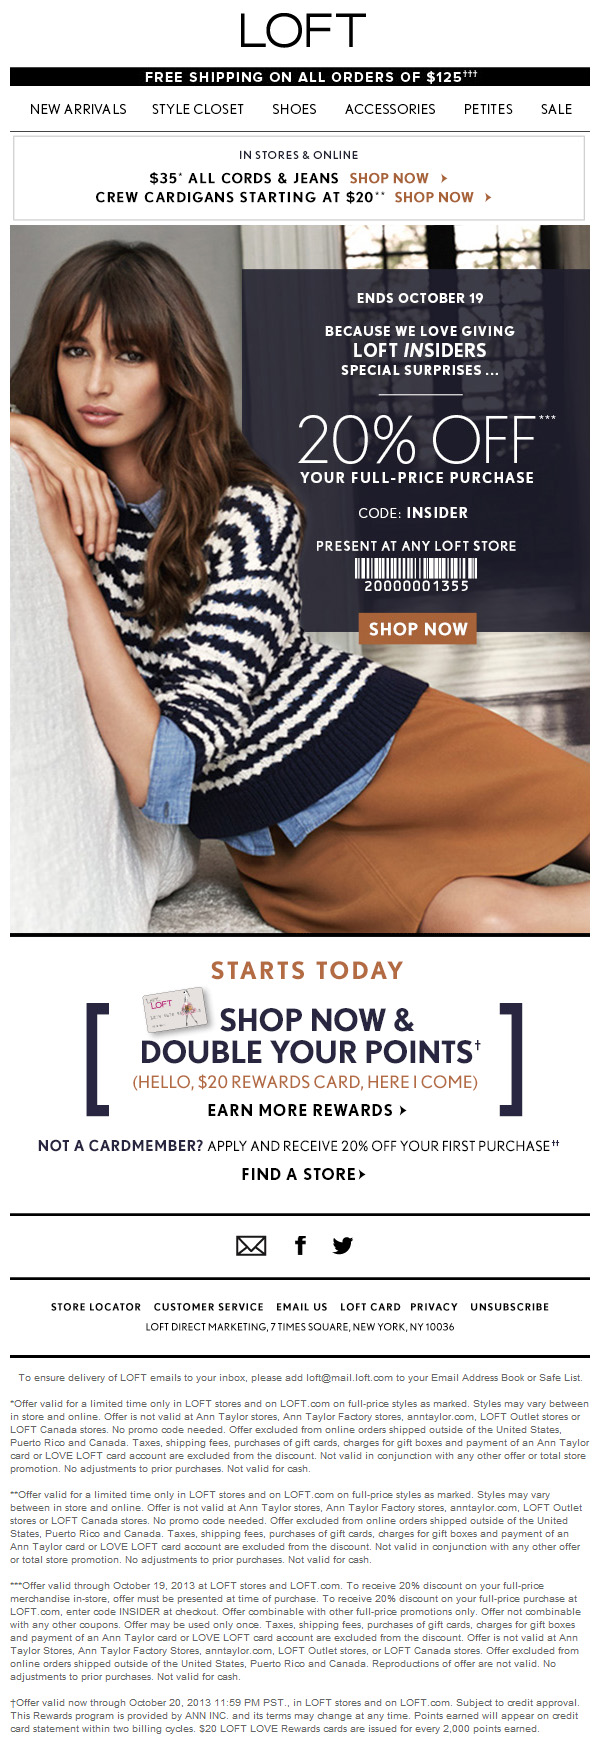 loft outlet in store coupon